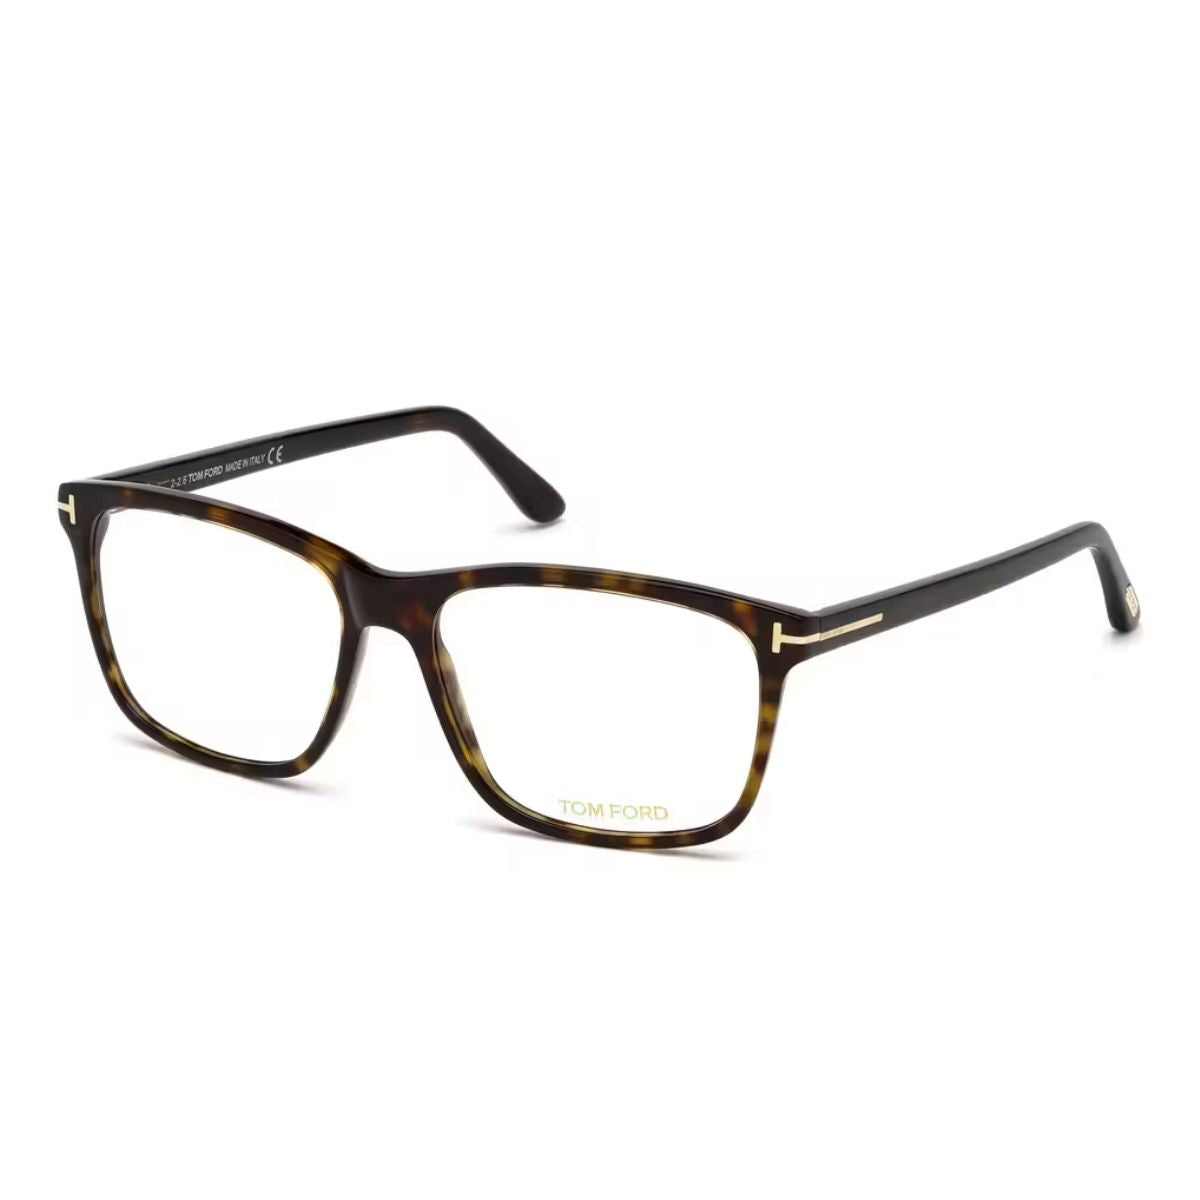 "Tom Ford TF 5479 052 frame, stylish square-shaped Havana optical glasses for men, available online at Optorium."